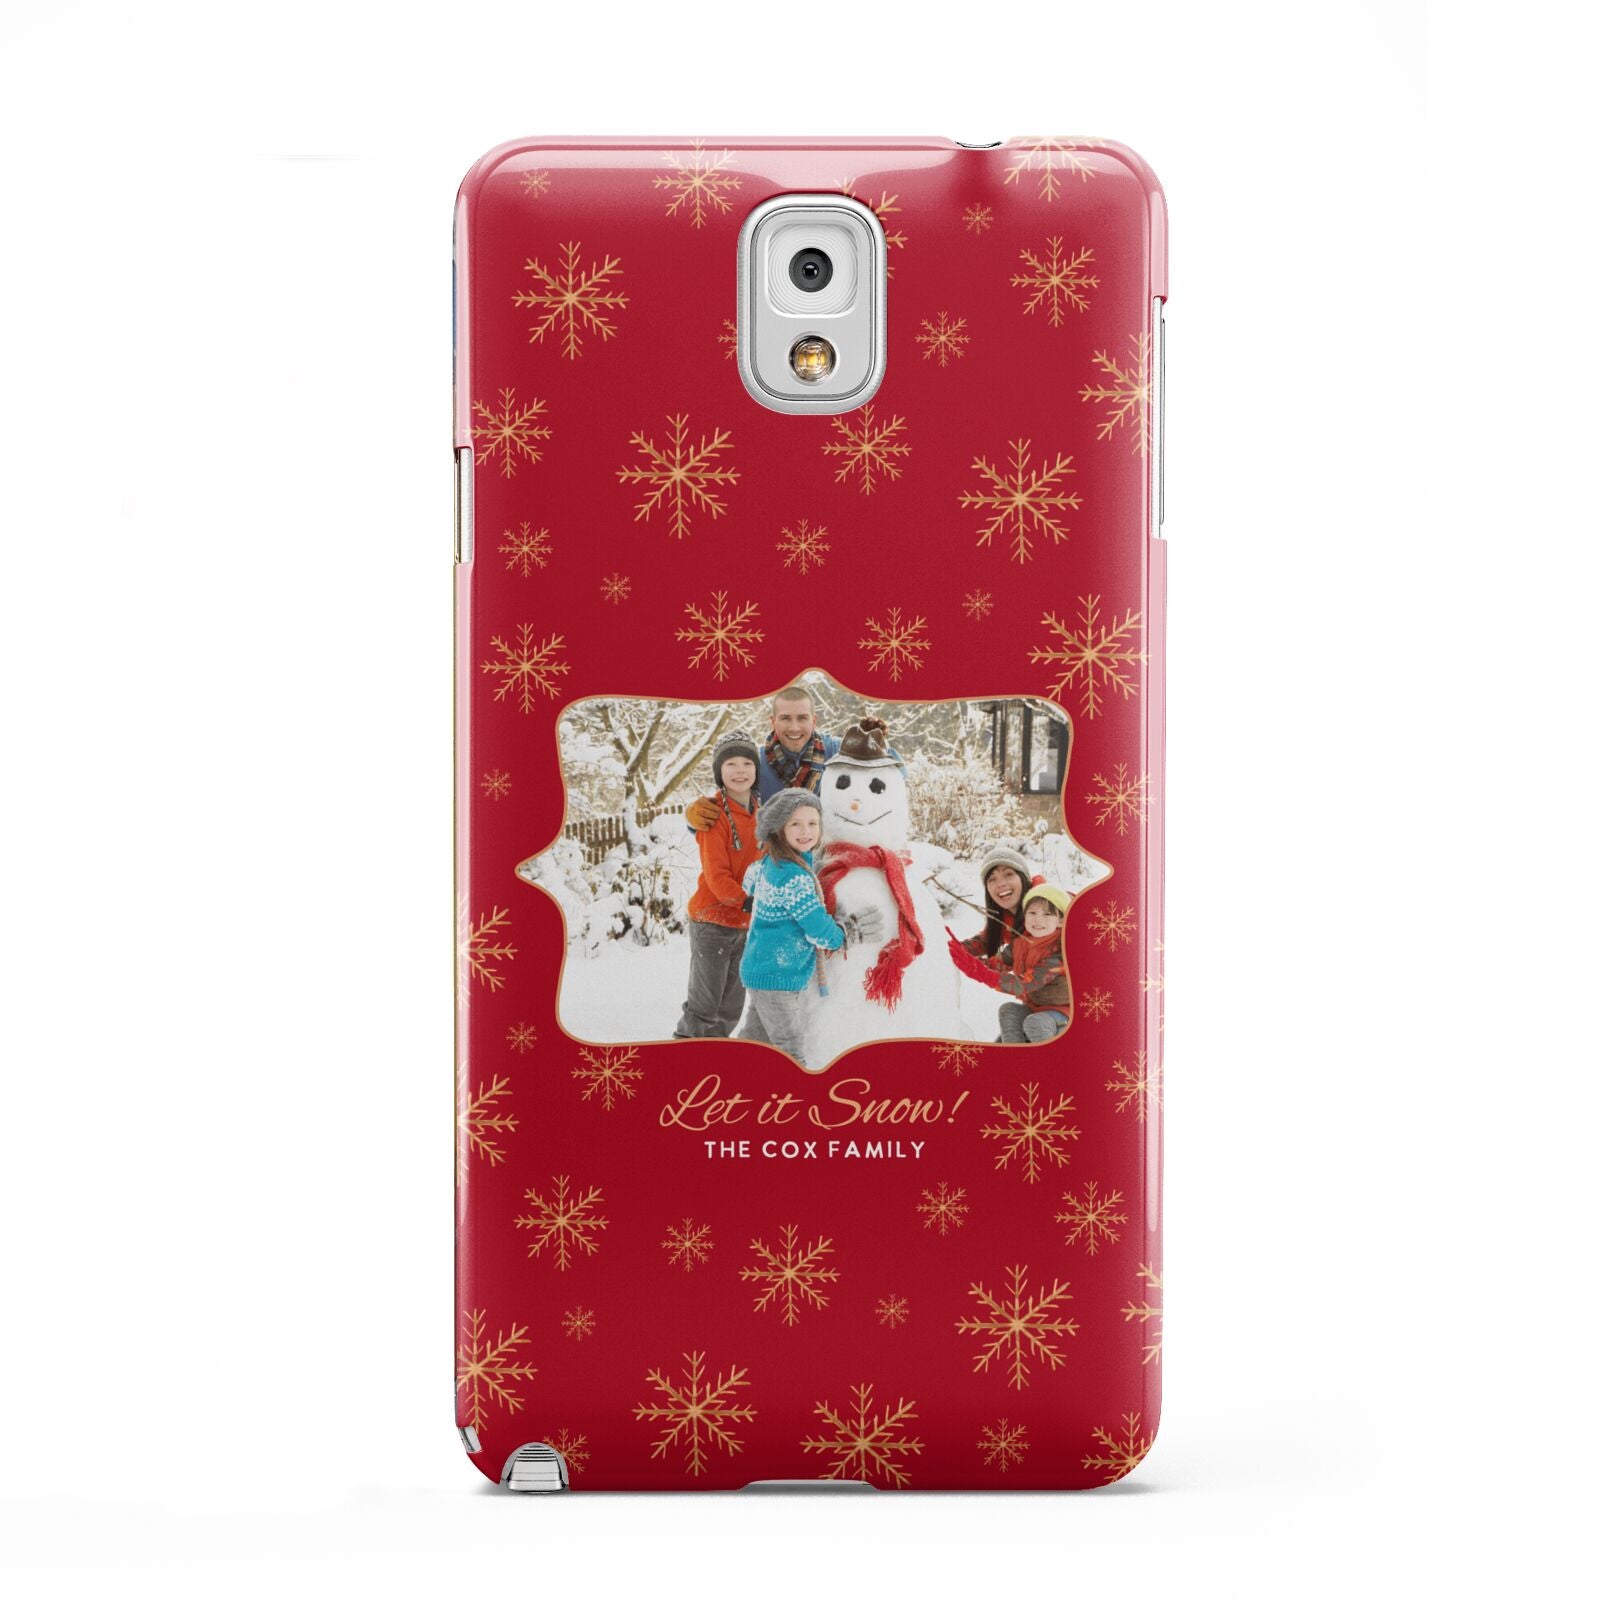 Let it Snow Christmas Photo Upload Samsung Galaxy Note 3 Case